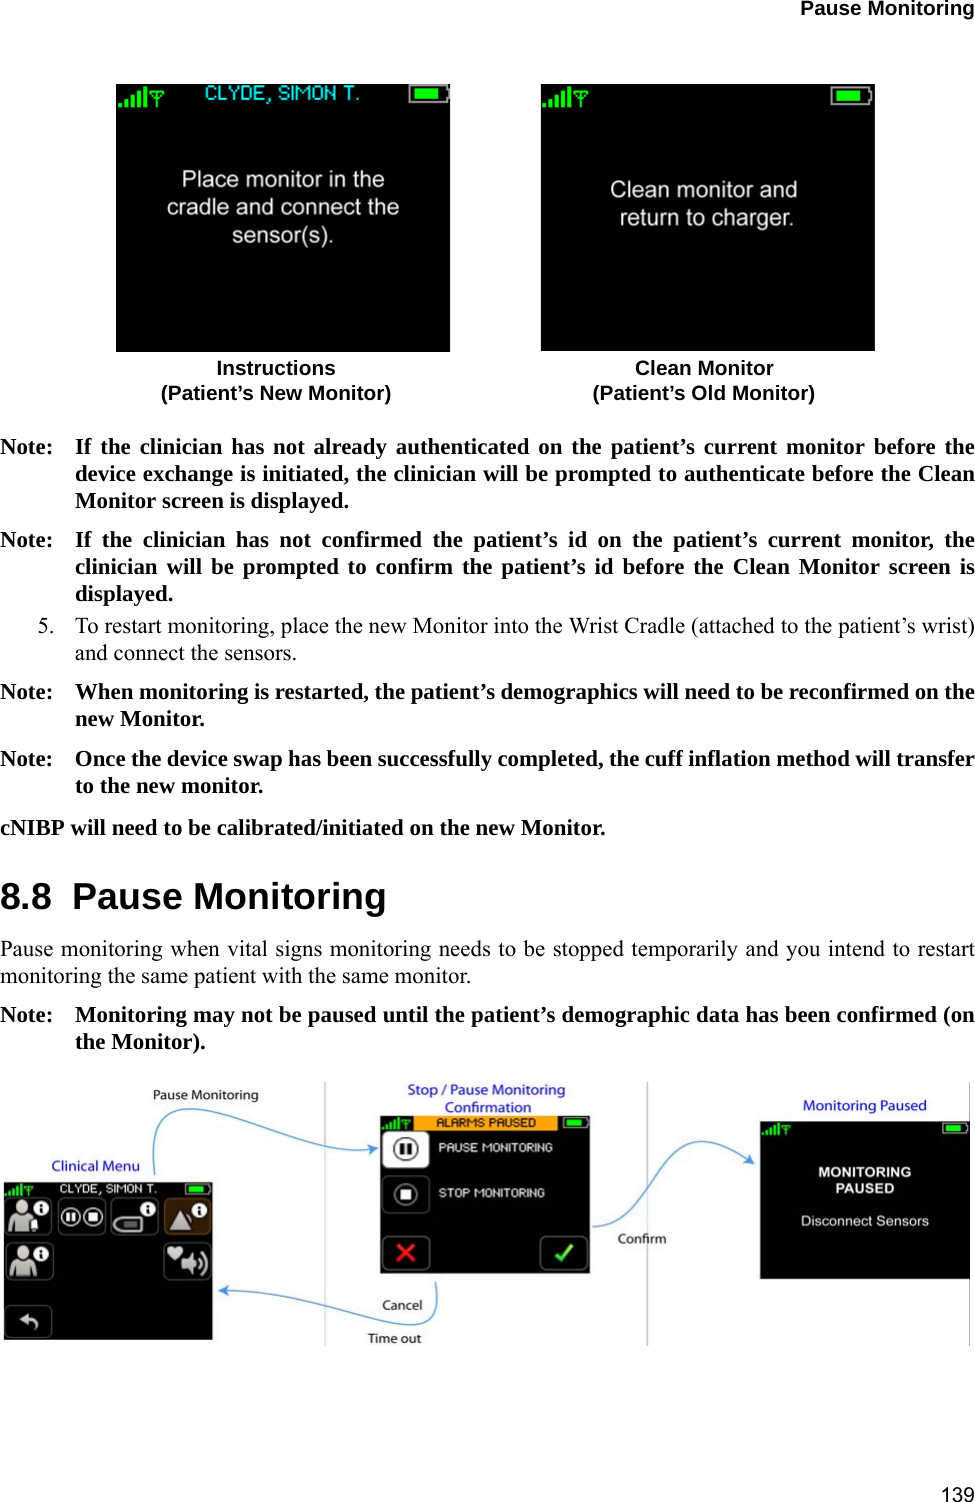 Pause Monitoring139 Note: If the clinician has not already authenticated on the patient’s current monitor before thedevice exchange is initiated, the clinician will be prompted to authenticate before the CleanMonitor screen is displayed.Note: If the clinician has not confirmed the patient’s id on the patient’s current monitor, theclinician will be prompted to confirm the patient’s id before the Clean Monitor screen isdisplayed.5. To restart monitoring, place the new Monitor into the Wrist Cradle (attached to the patient’s wrist)and connect the sensors.Note: When monitoring is restarted, the patient’s demographics will need to be reconfirmed on thenew Monitor.Note: Once the device swap has been successfully completed, the cuff inflation method will transferto the new monitor. cNIBP will need to be calibrated/initiated on the new Monitor.8.8  Pause MonitoringPause monitoring when vital signs monitoring needs to be stopped temporarily and you intend to restartmonitoring the same patient with the same monitor.Note: Monitoring may not be paused until the patient’s demographic data has been confirmed (onthe Monitor).Instructions Clean Monitor(Patient’s New Monitor) (Patient’s Old Monitor)